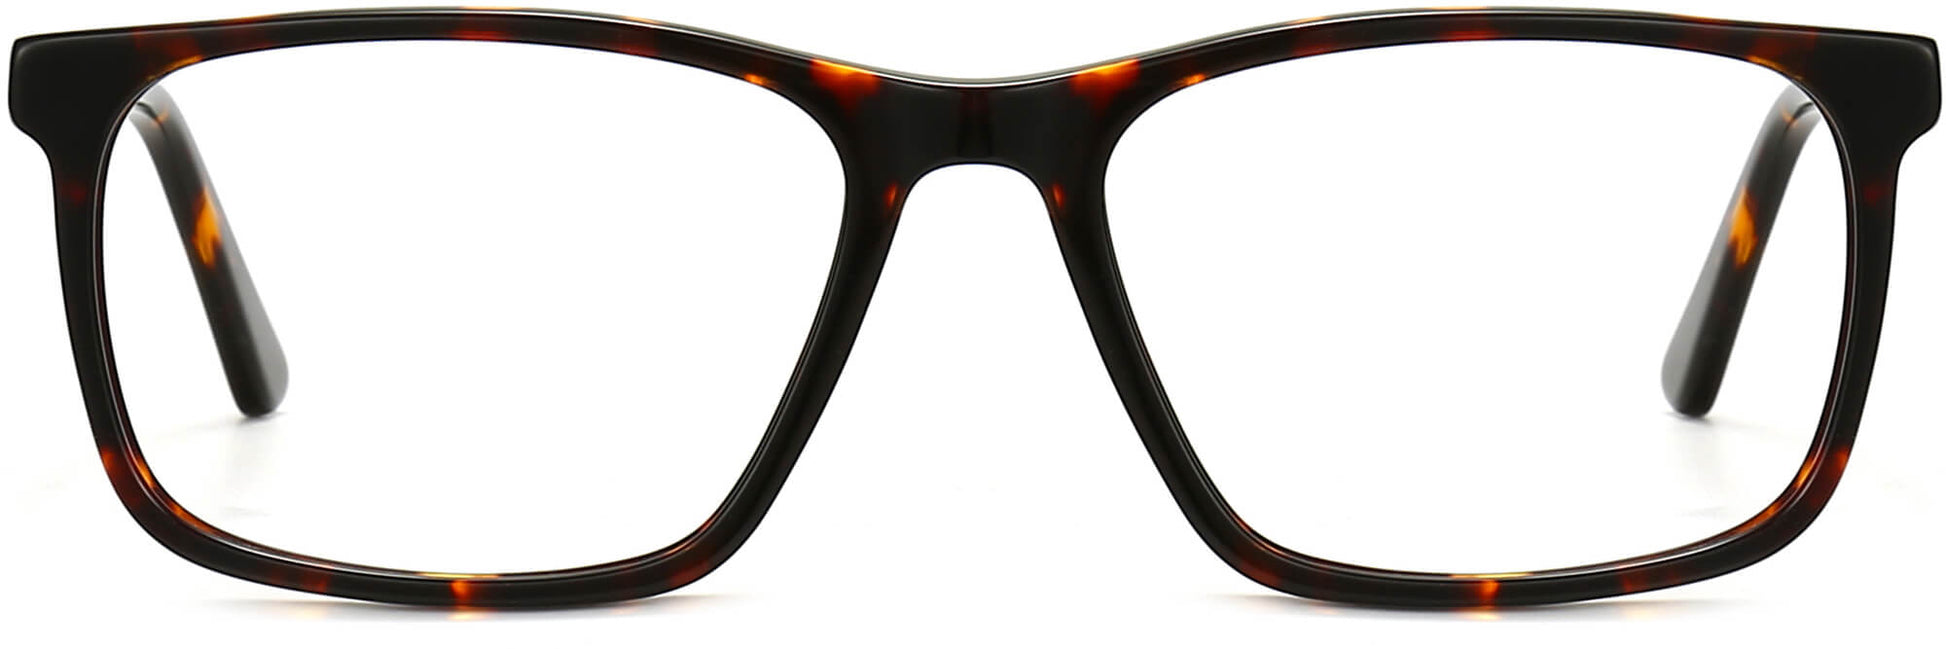 Dillon Square Tortoise Eyeglasses from ANRRI, front view